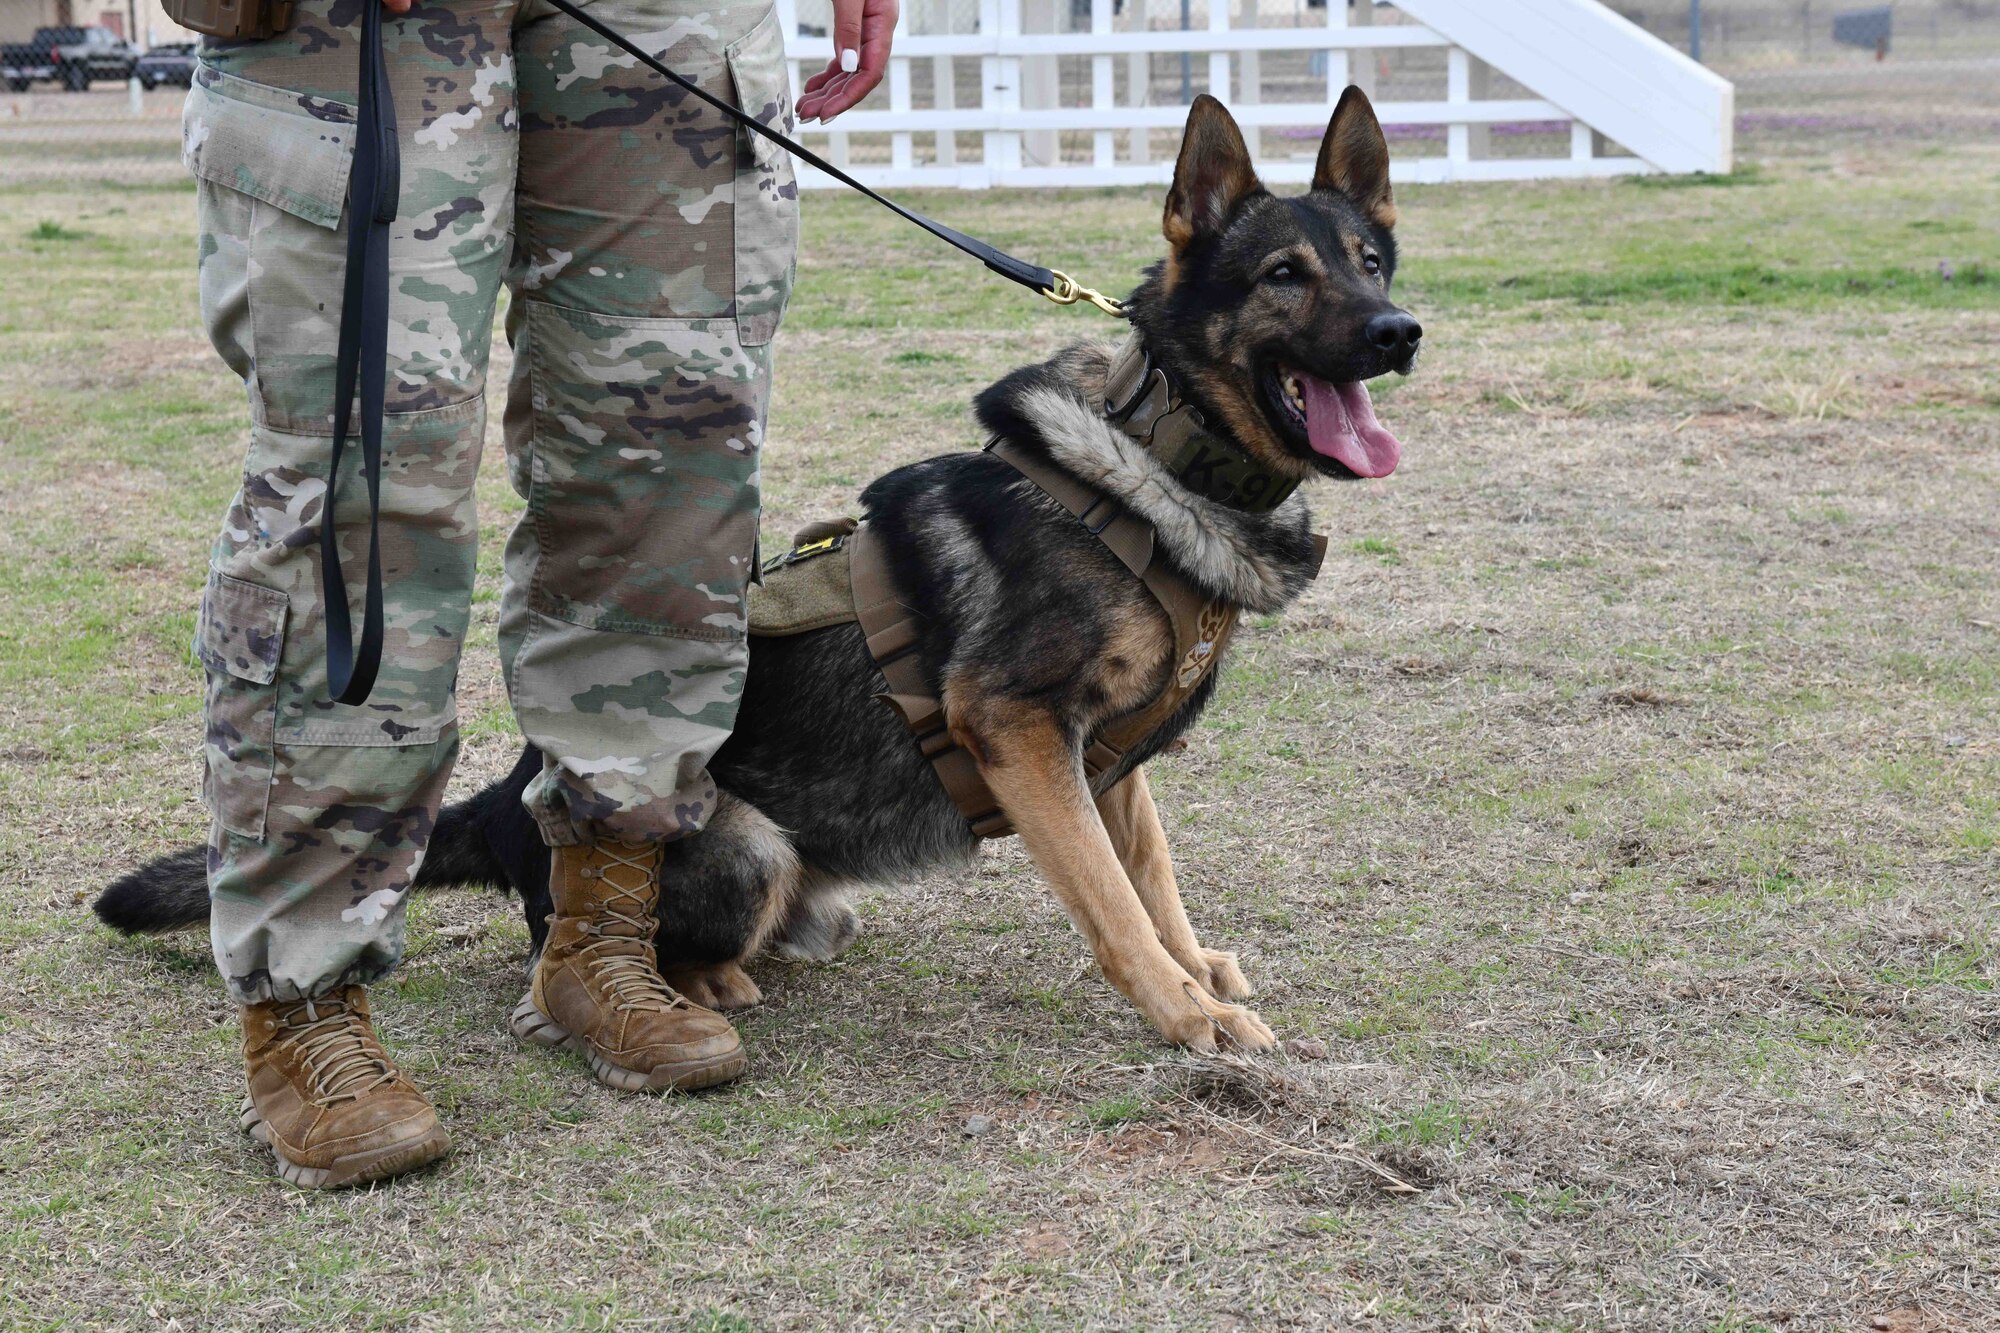 Bingo, 97th Security Forces Squadron (SFS) military working dog (MWD), awaits a command from U.S. Air Force Staff Sgt. Destiny Savini, 97th SFS MWD handler, at Altus Air Force Base, Oklahoma, March 6, 2023. Kennel masters, supervisors in charge of unit operations, are responsible for pairing dogs with handlers based on their personalities and experiences. (U.S. Air Force photo by Airman 1st Class Miyah Gray)